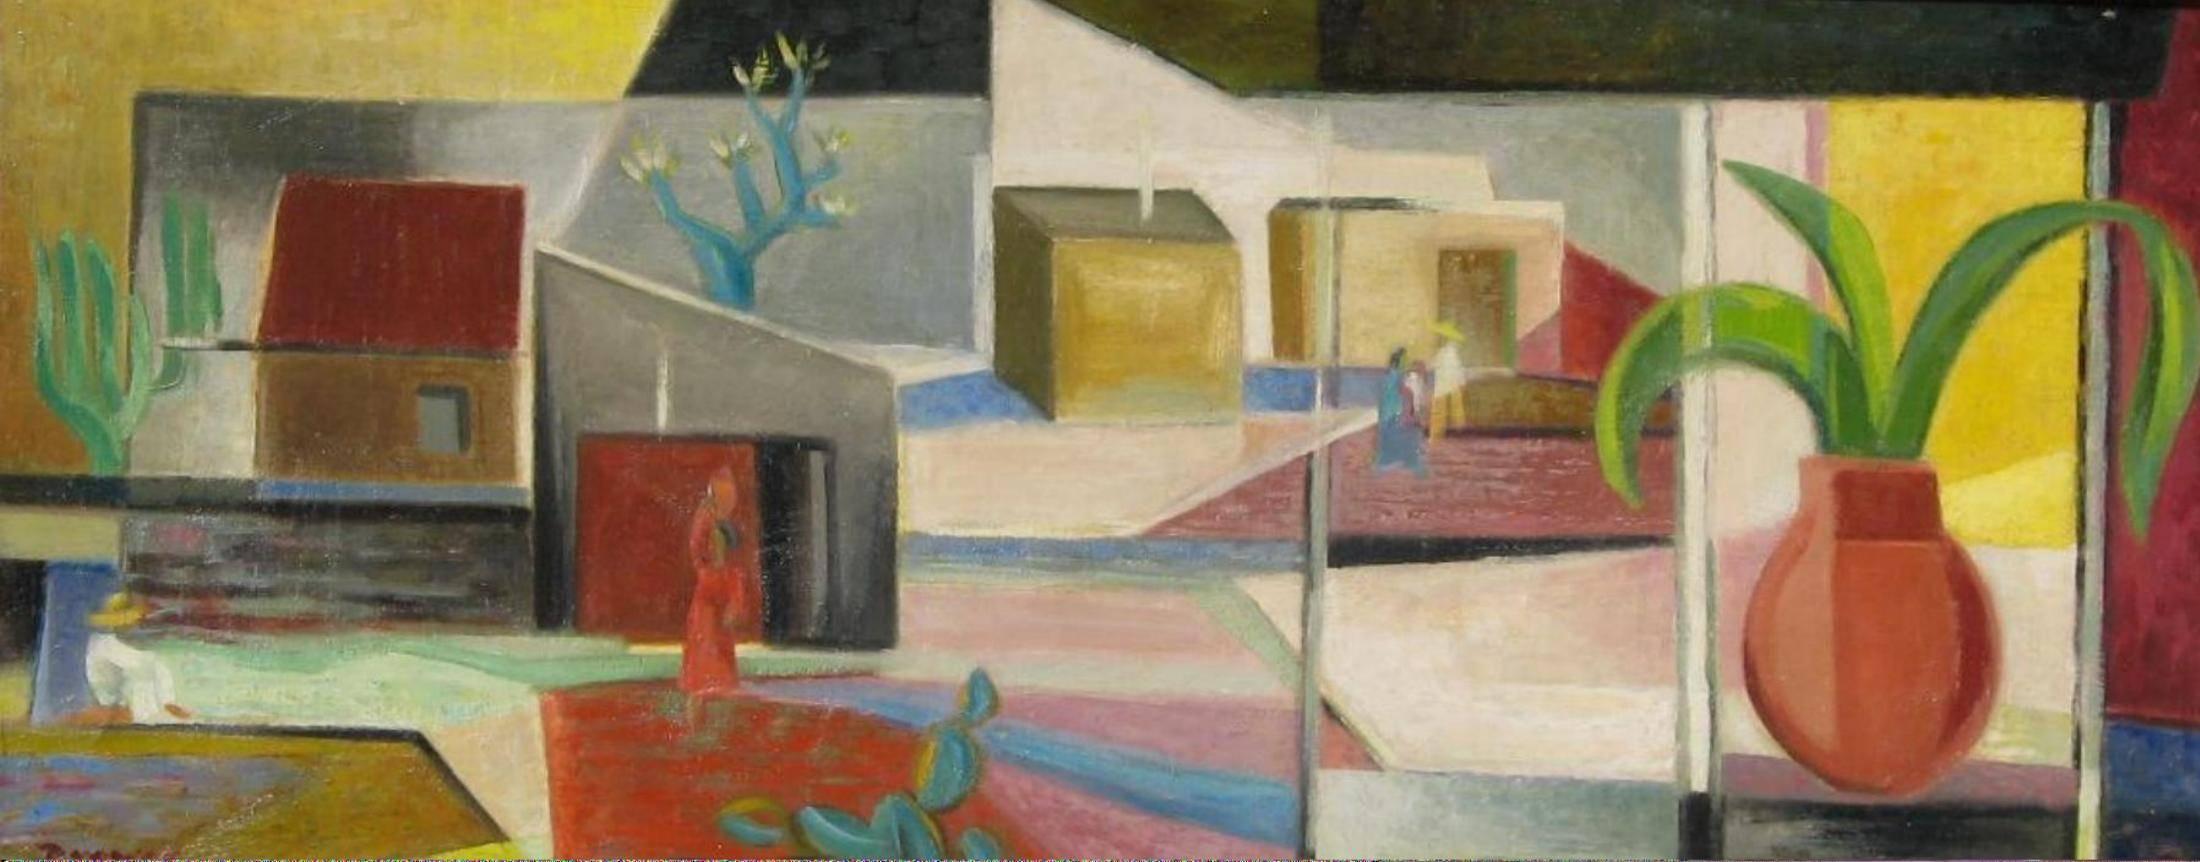 Werner Drewes (1899-1985) oil on canvas, 1947
Titled: “Adobe Village” 
Measures: 15 ½ x 36 Frame: 21 x 42
Signed lower left and also on the verso
In excellent condition.

Born in Niederlausitz, Germany on July 27, 1899. Drewes was a pupil of